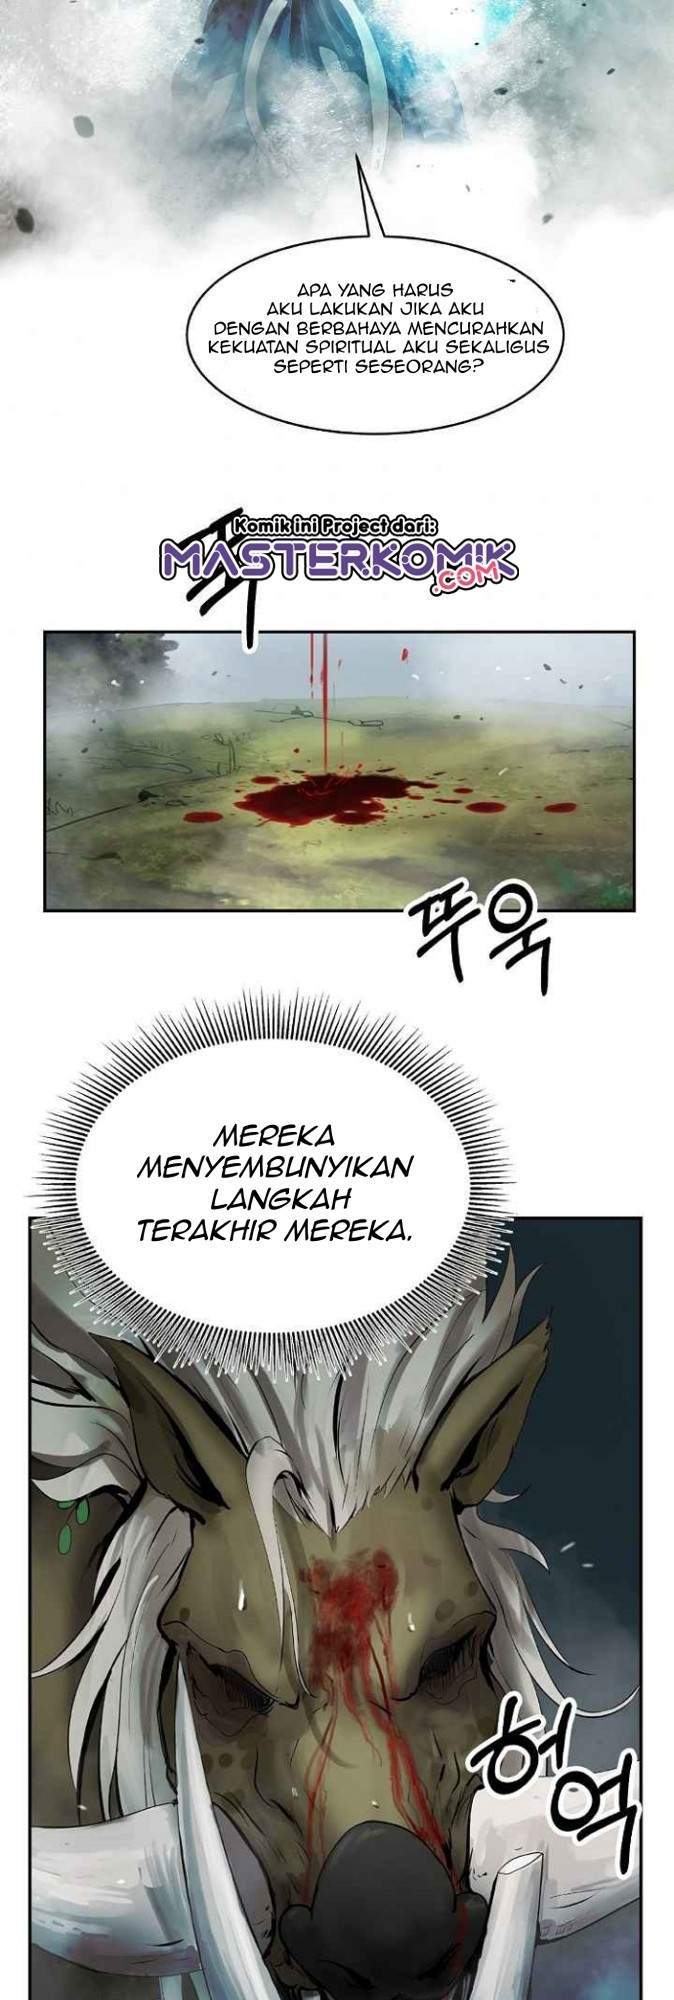 Cystic Story Chapter 18 18